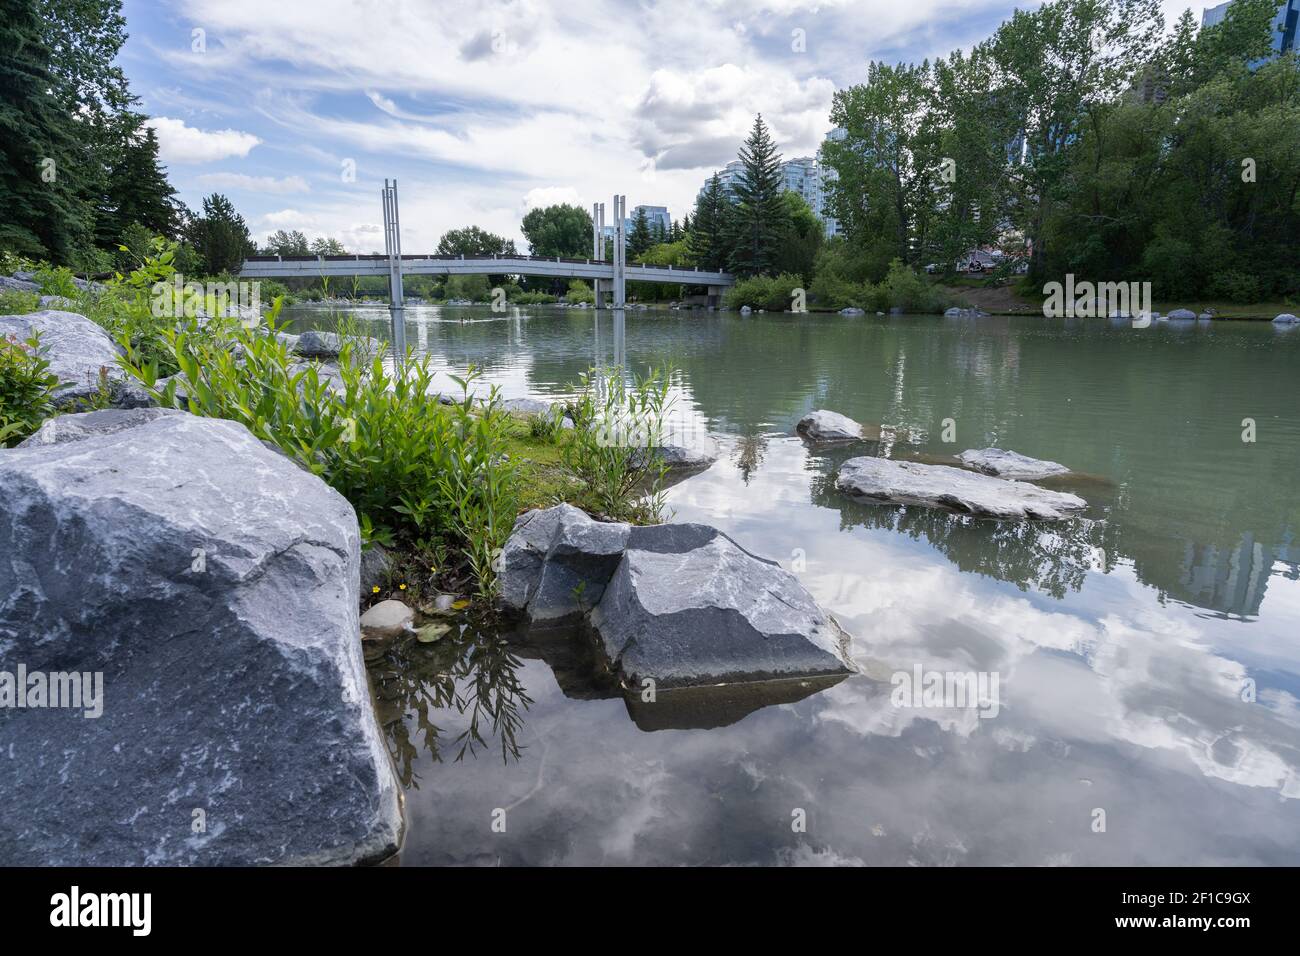 Calgary Nature Park High Resolution Stock Photography Images - Alamy